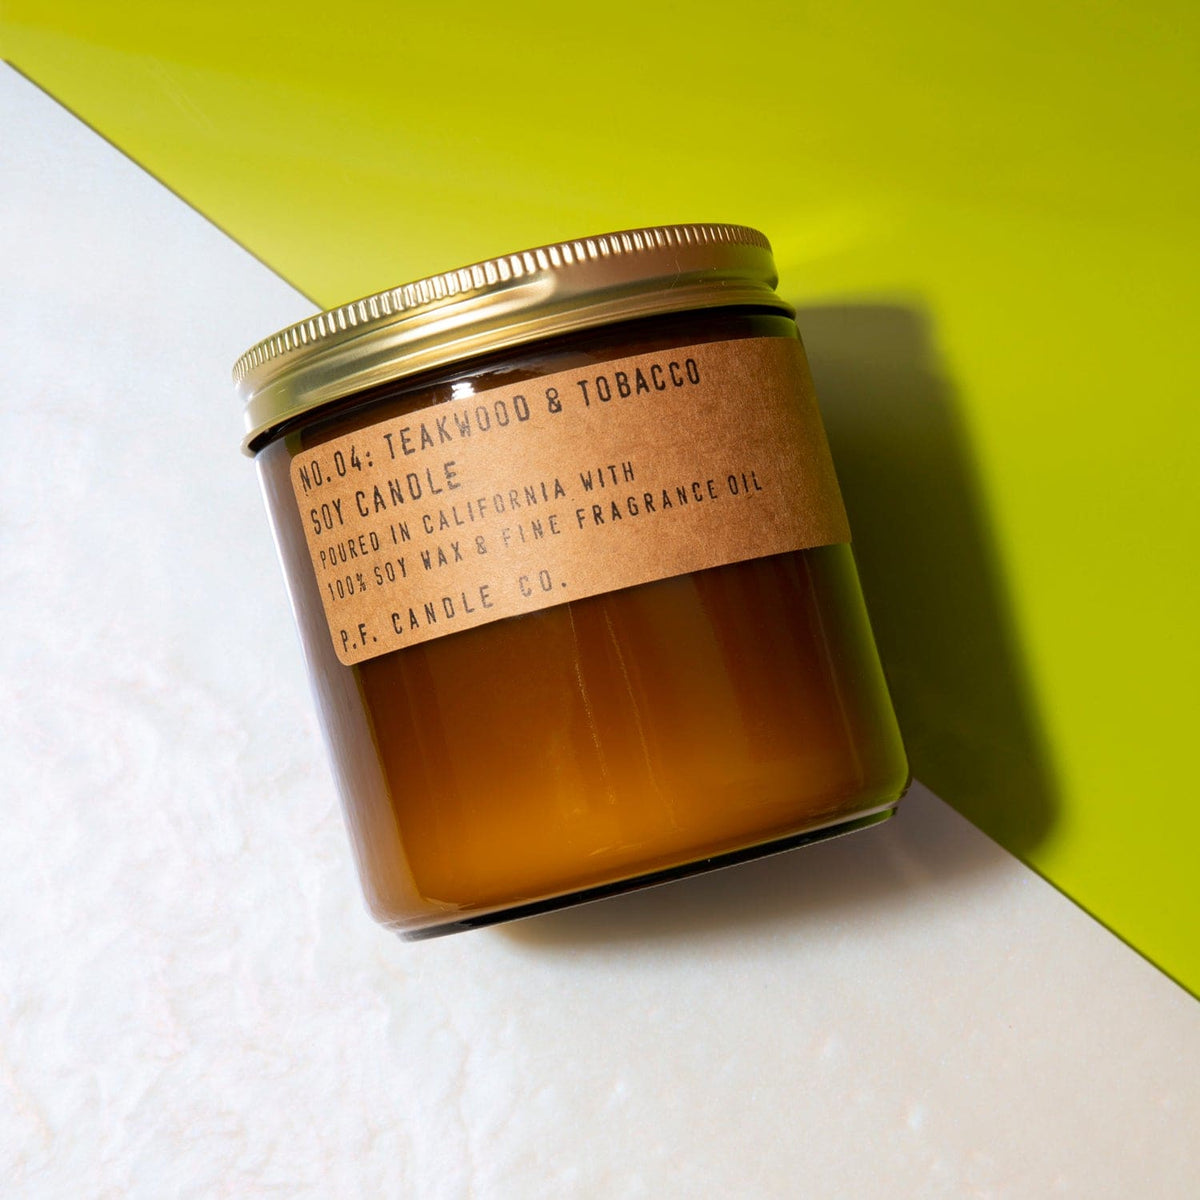 P.f. Candle Co. Large - Teakwood & Tobacco Candle - Candles 